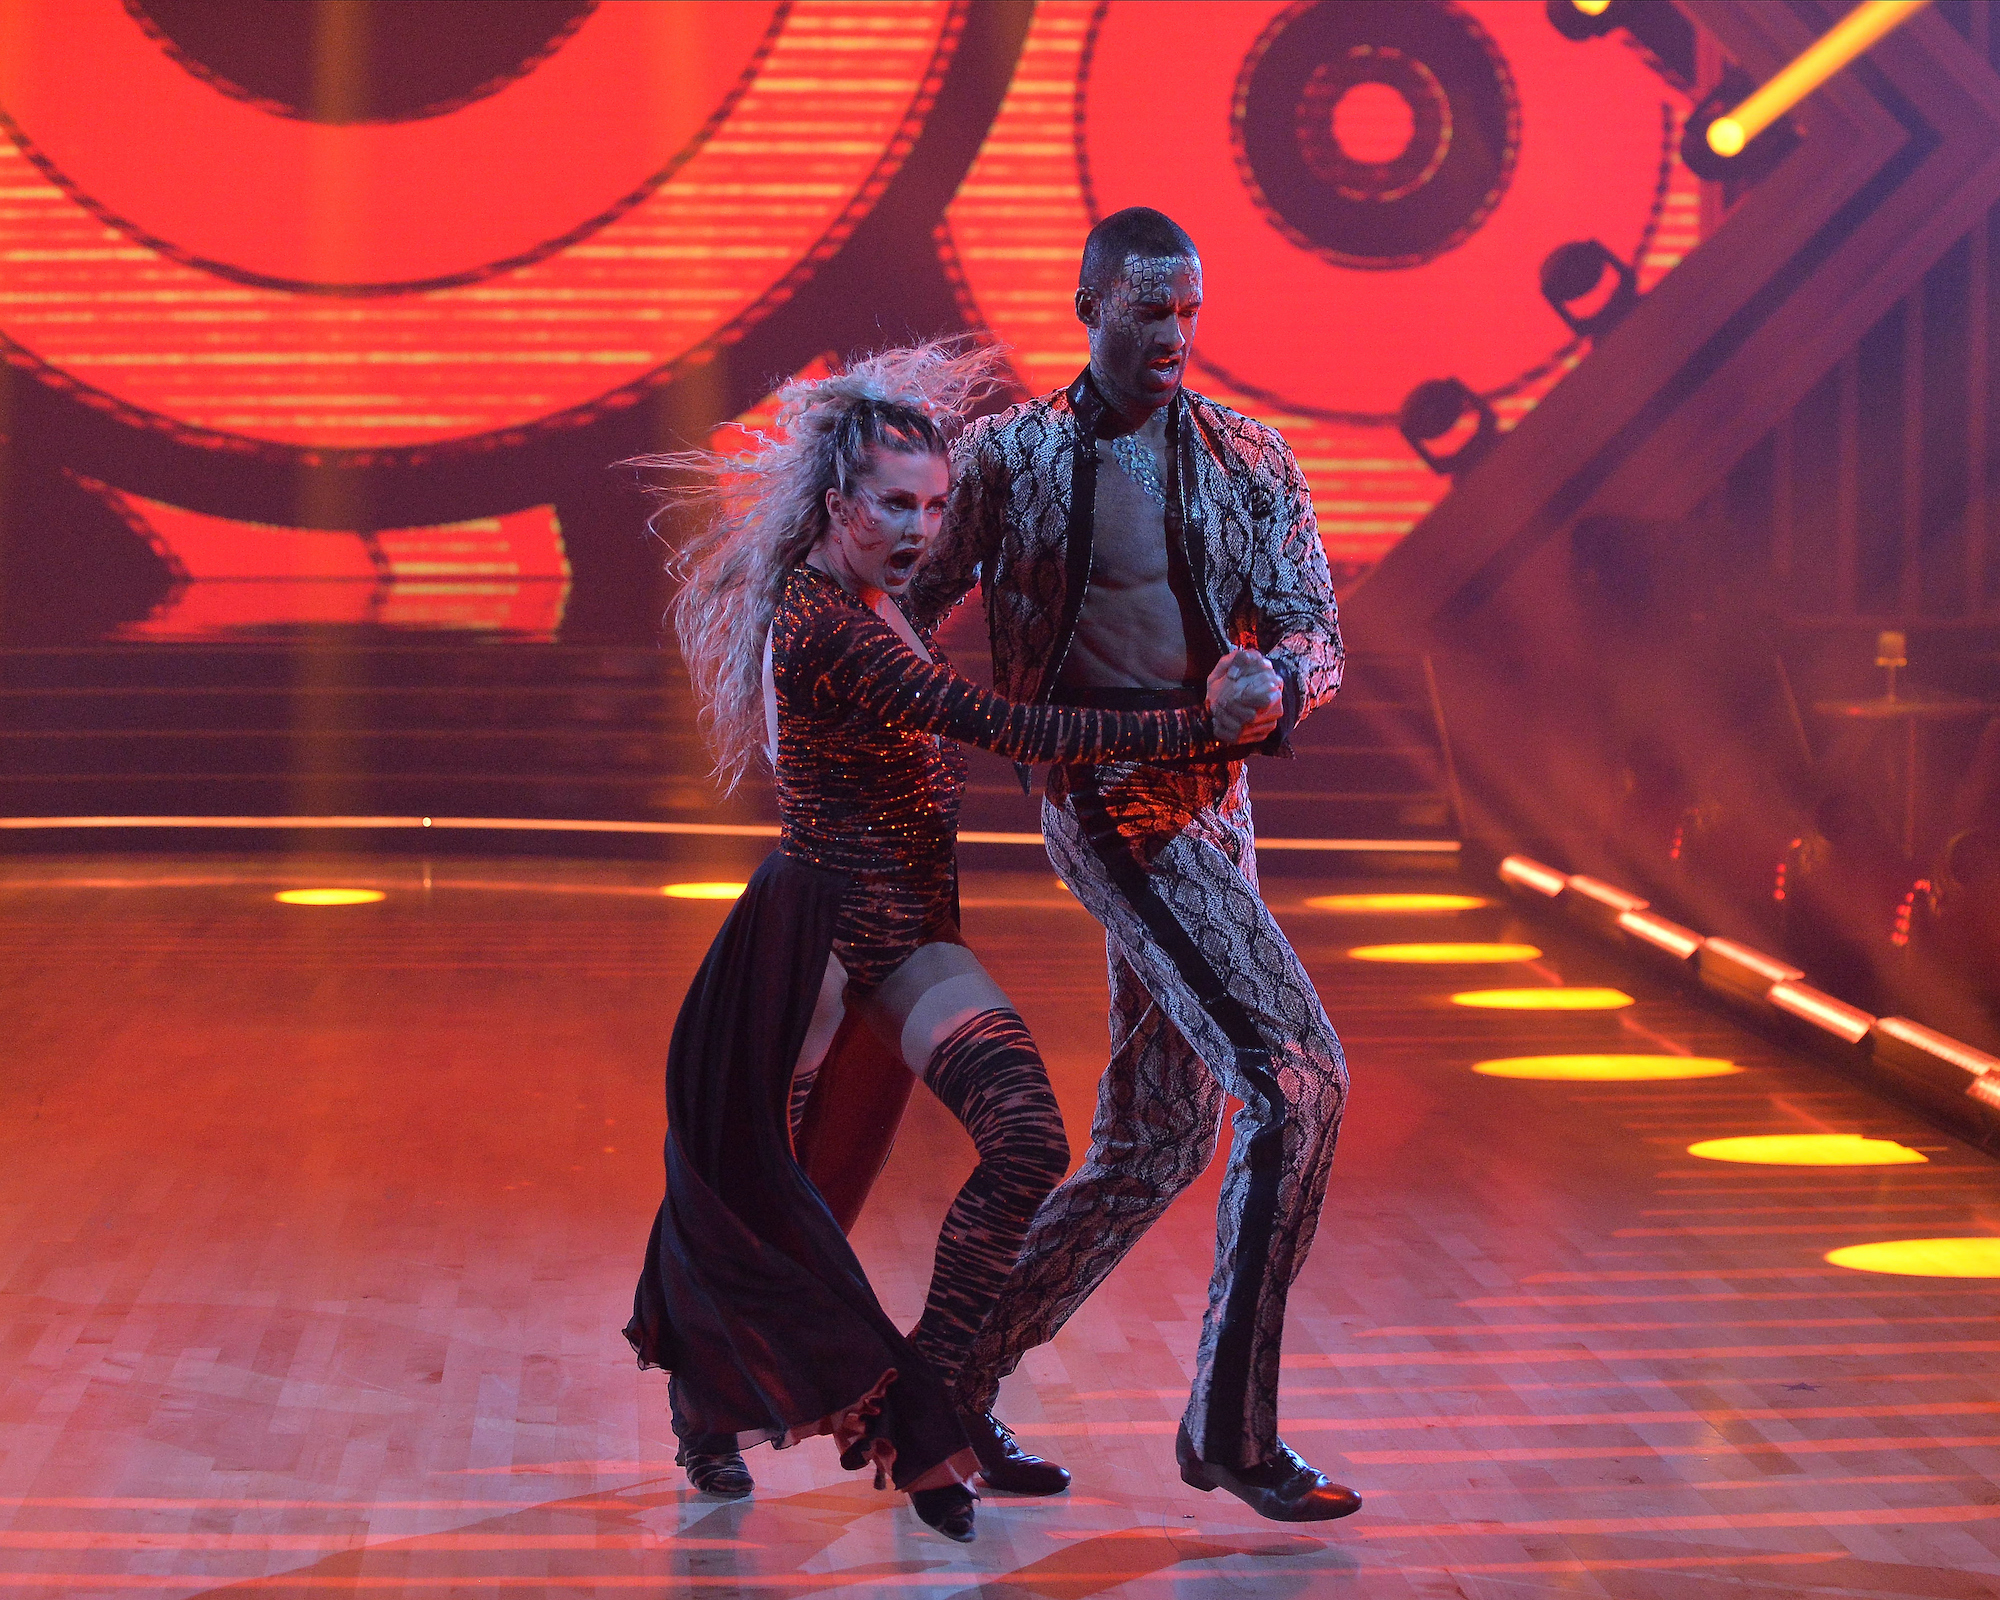 Lindsay Arnold dances with Matt James during Disney Villains Night on 'Dancing with the Stars'